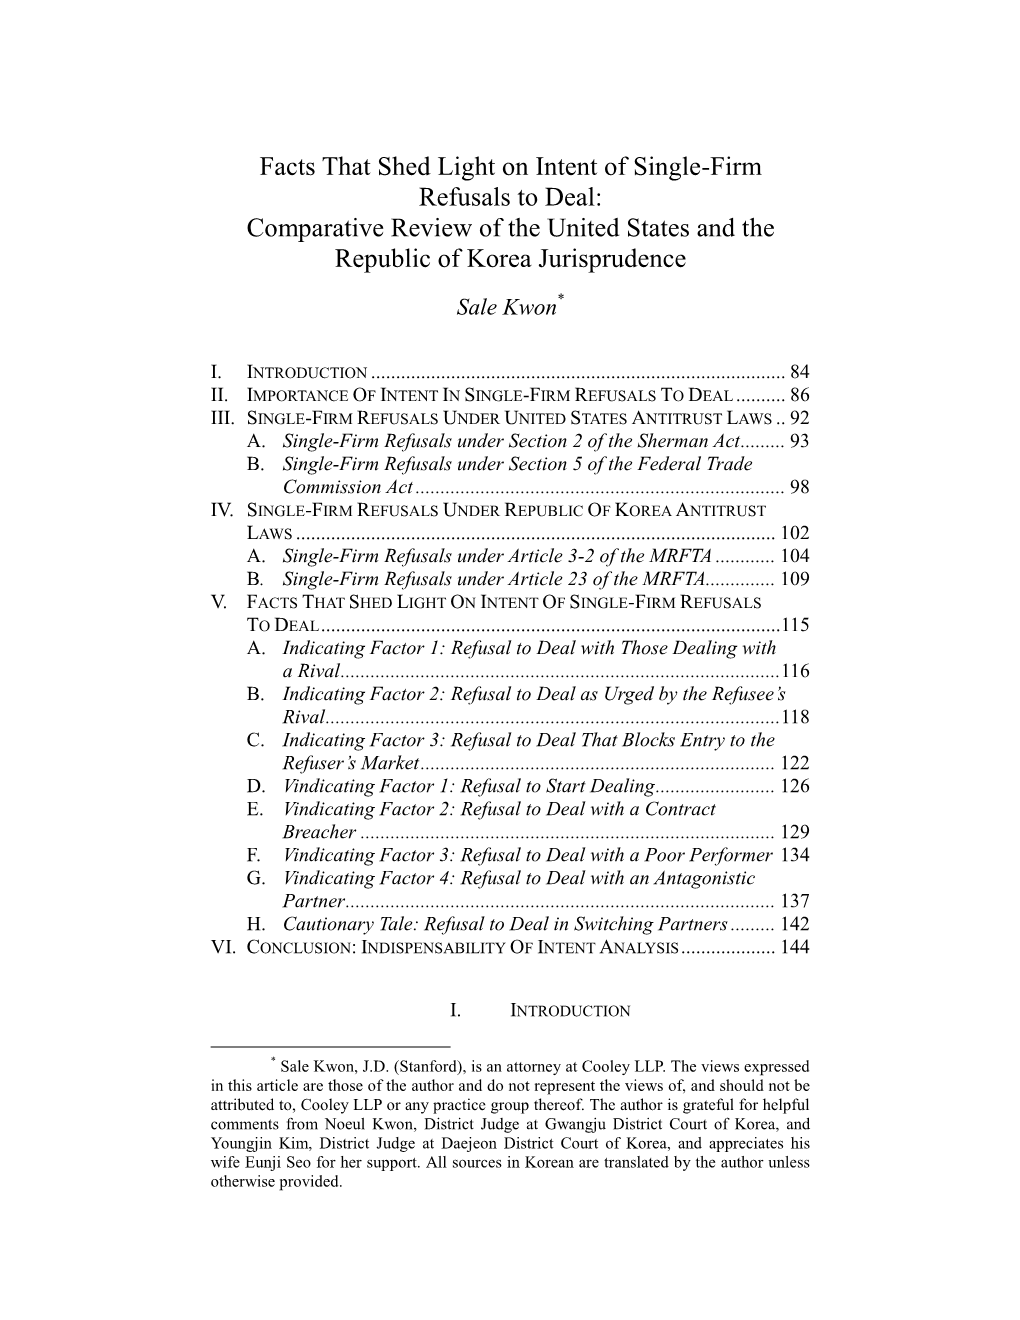 Facts That Shed Light on Intent of Single-Firm Refusals to Deal: Comparative Review of the United States and the Republic of Korea Jurisprudence